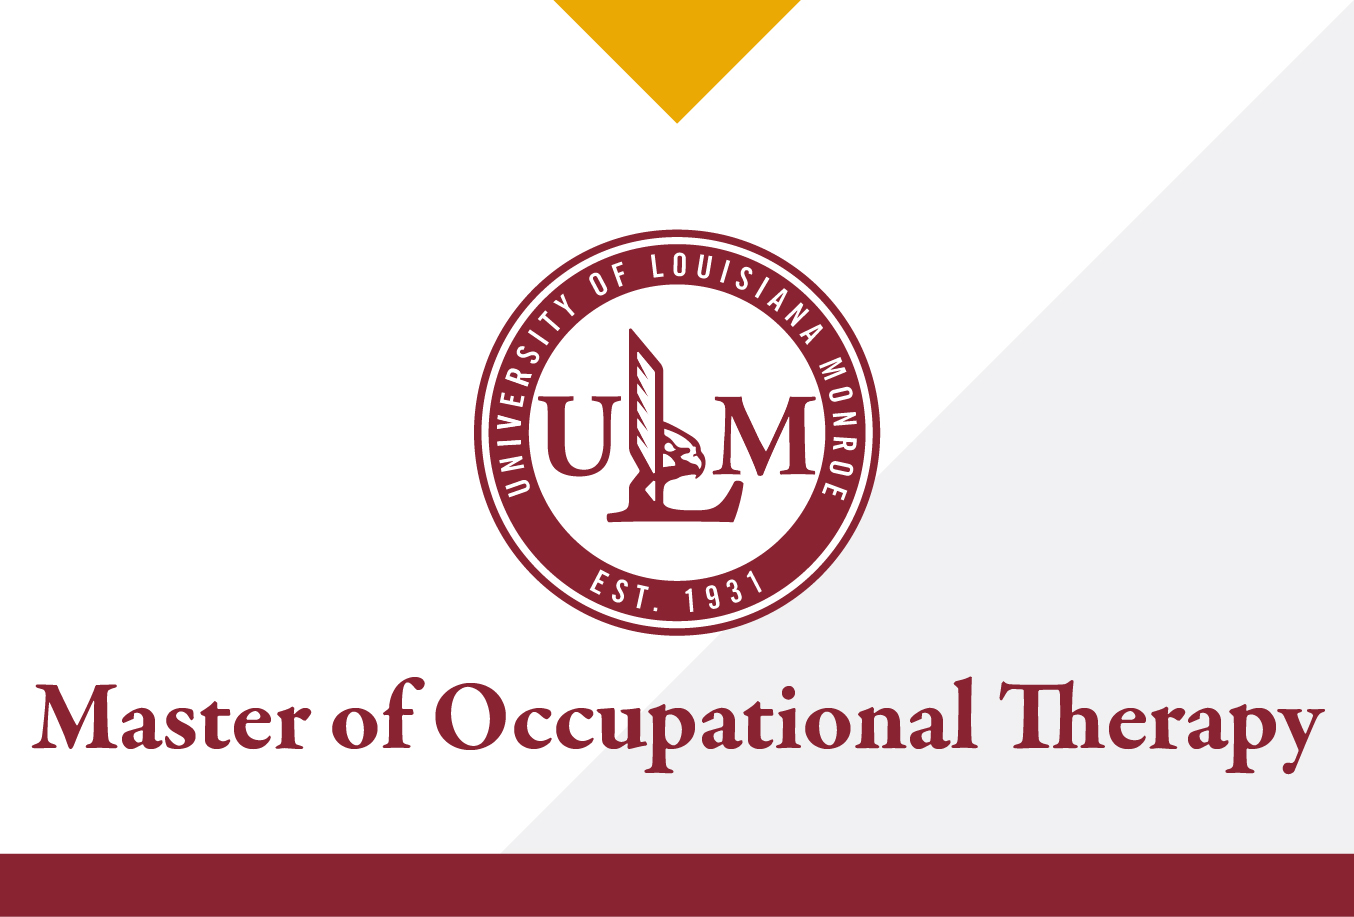 ULM Master of Occupational Therapy Program receives 10 year accreditation